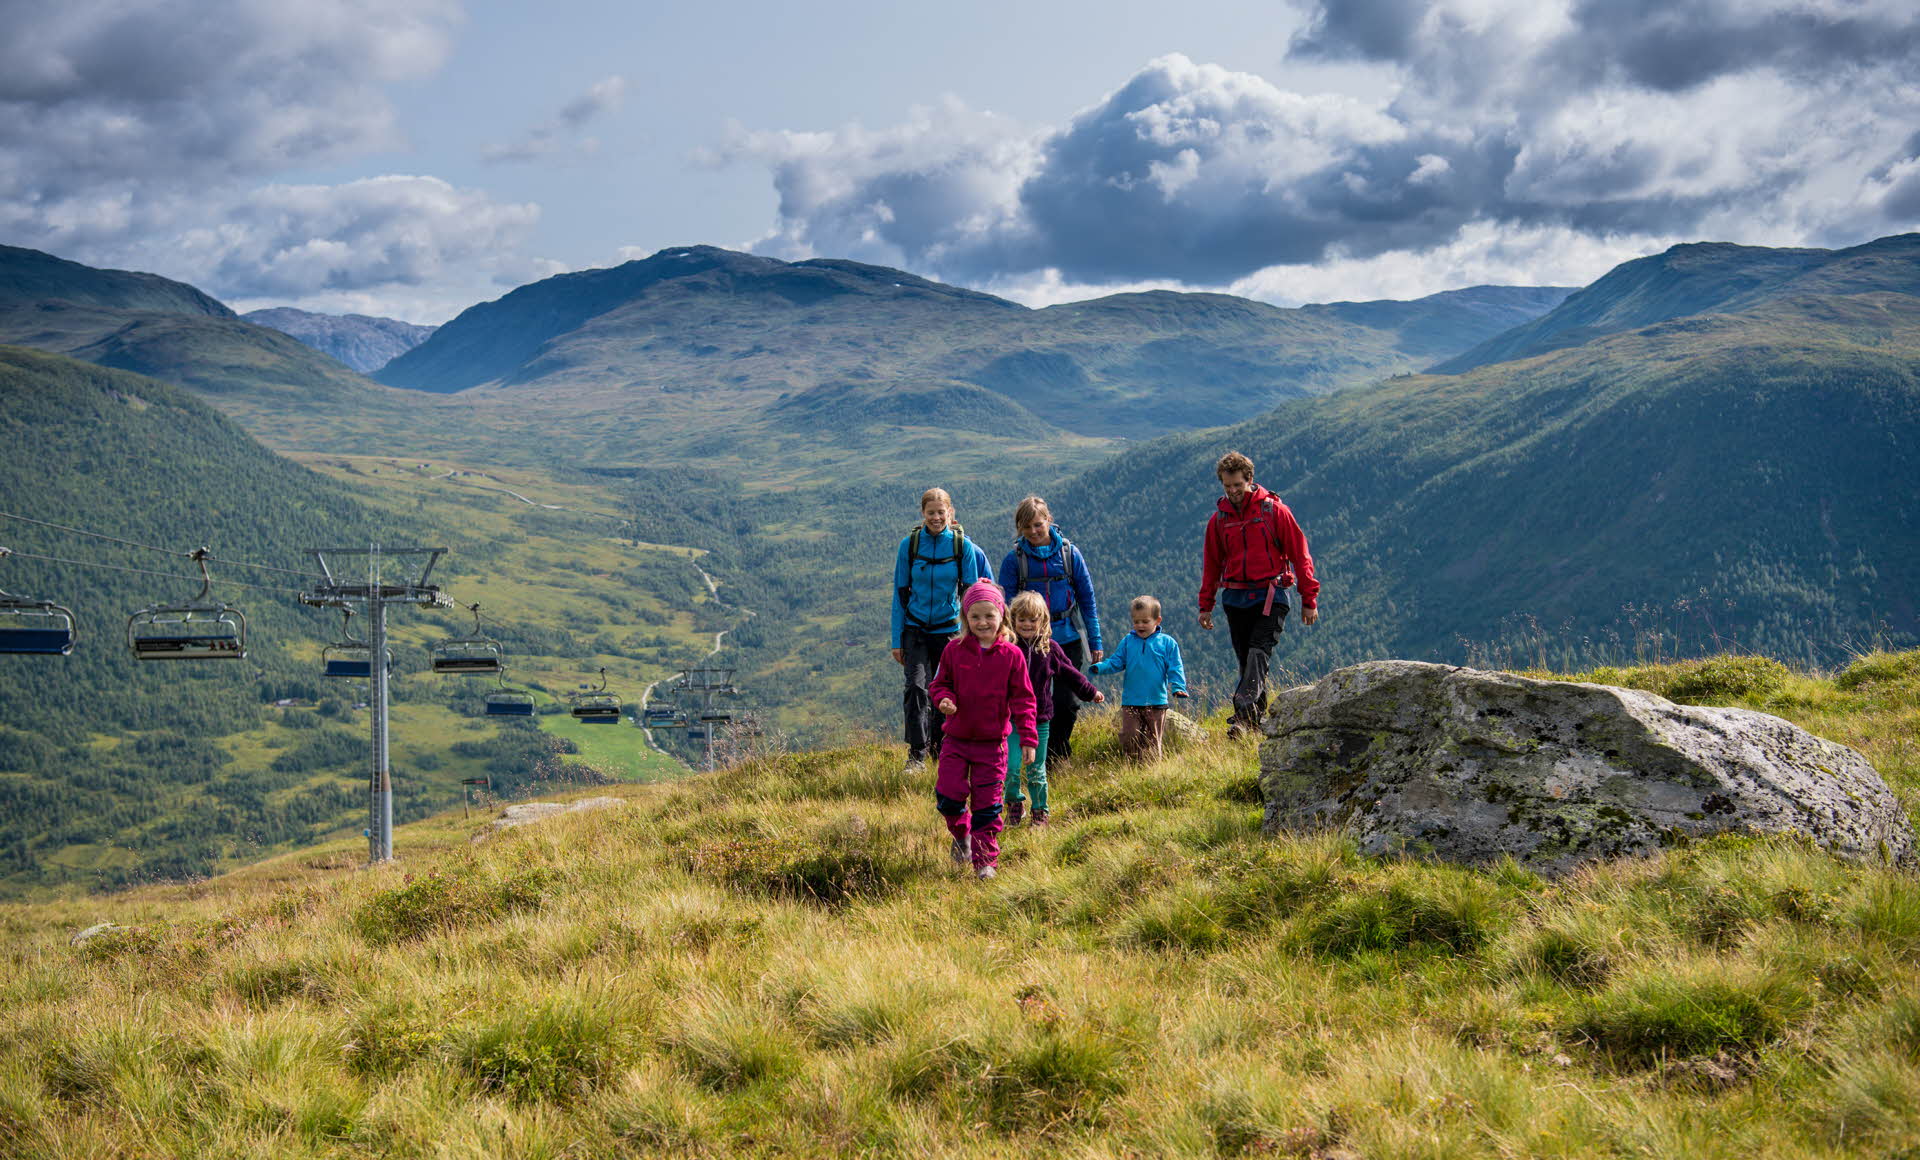 A group of children and adults walking towards the camera in the mountains near the Myrkdalen chairlift